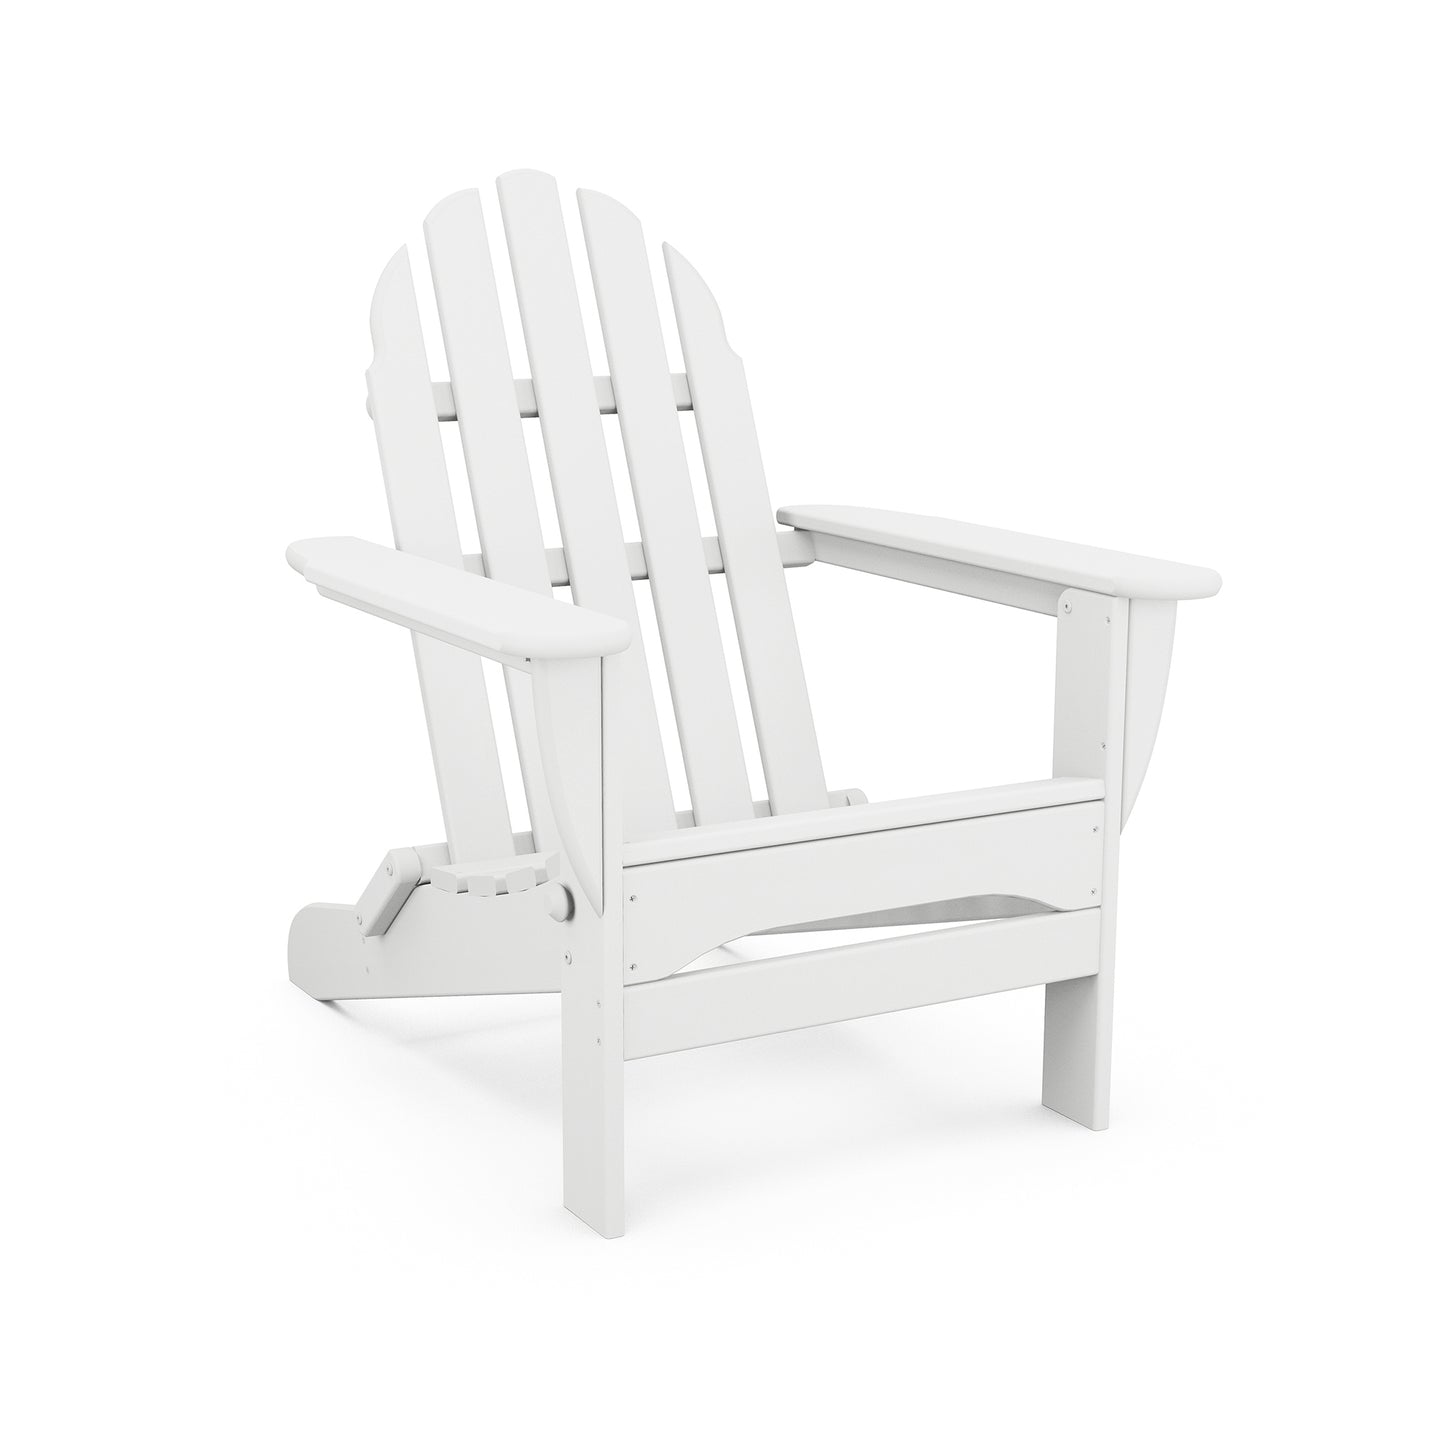 A plain white POLYWOOD® Classic Folding Adirondack chair set against a seamless white background, showcasing its slatted design and wide armrests.